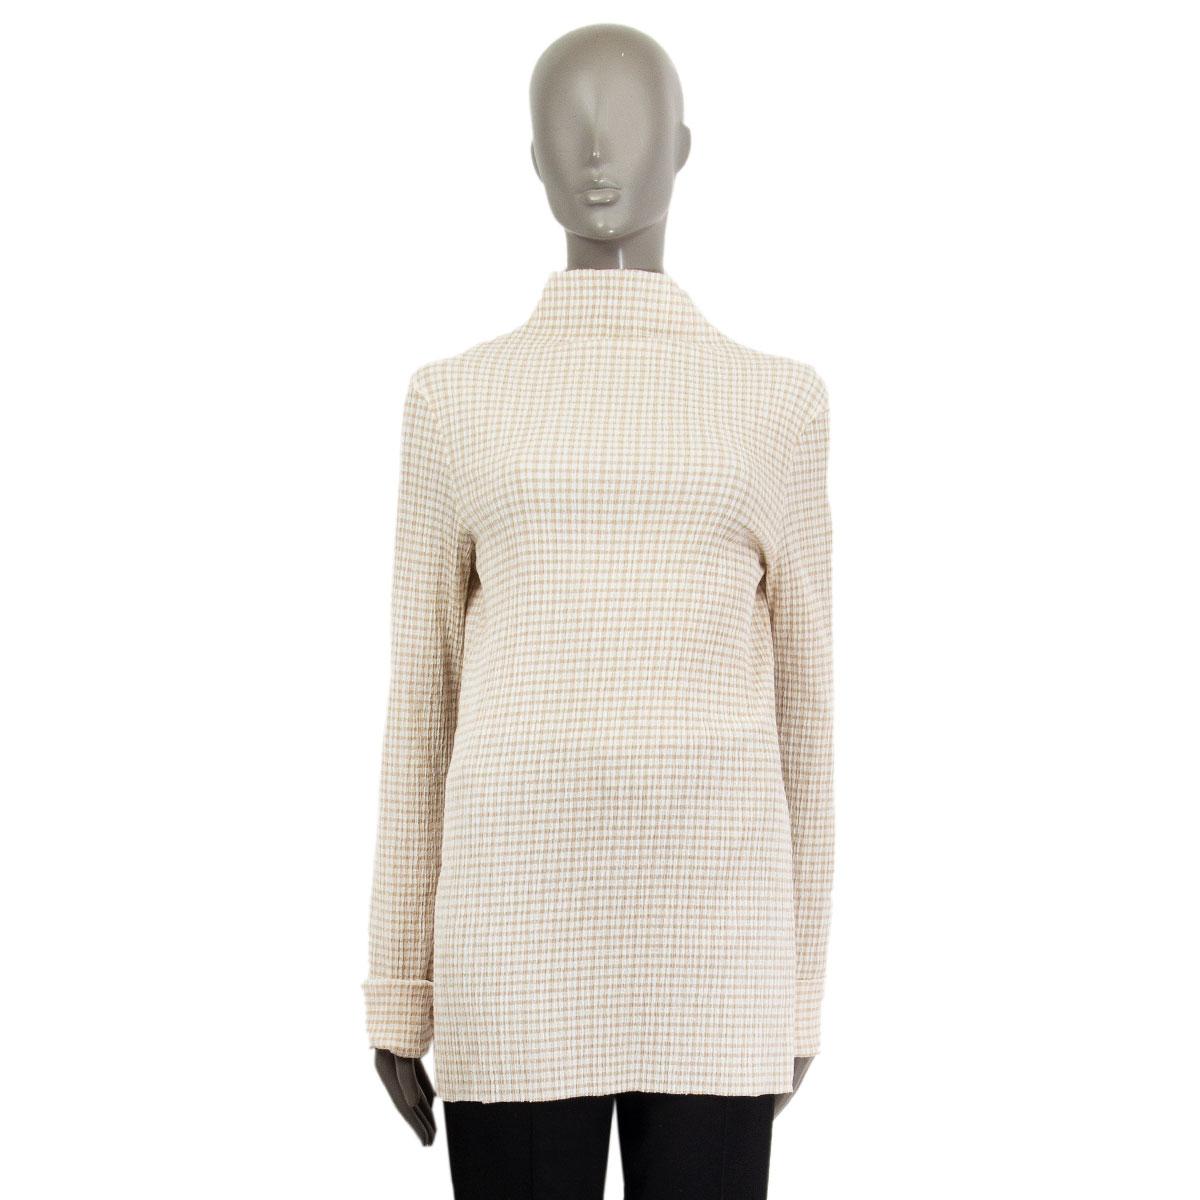 100% authentic Jil Sander long sleeve high collar blouse in off-white and beige stretchy cotton crepe and elastane (missing content tag). Unlined. Has been worn and is in excellent condition.

Measurements
Tag Size	Missing Tag (S/M) 
Shoulder